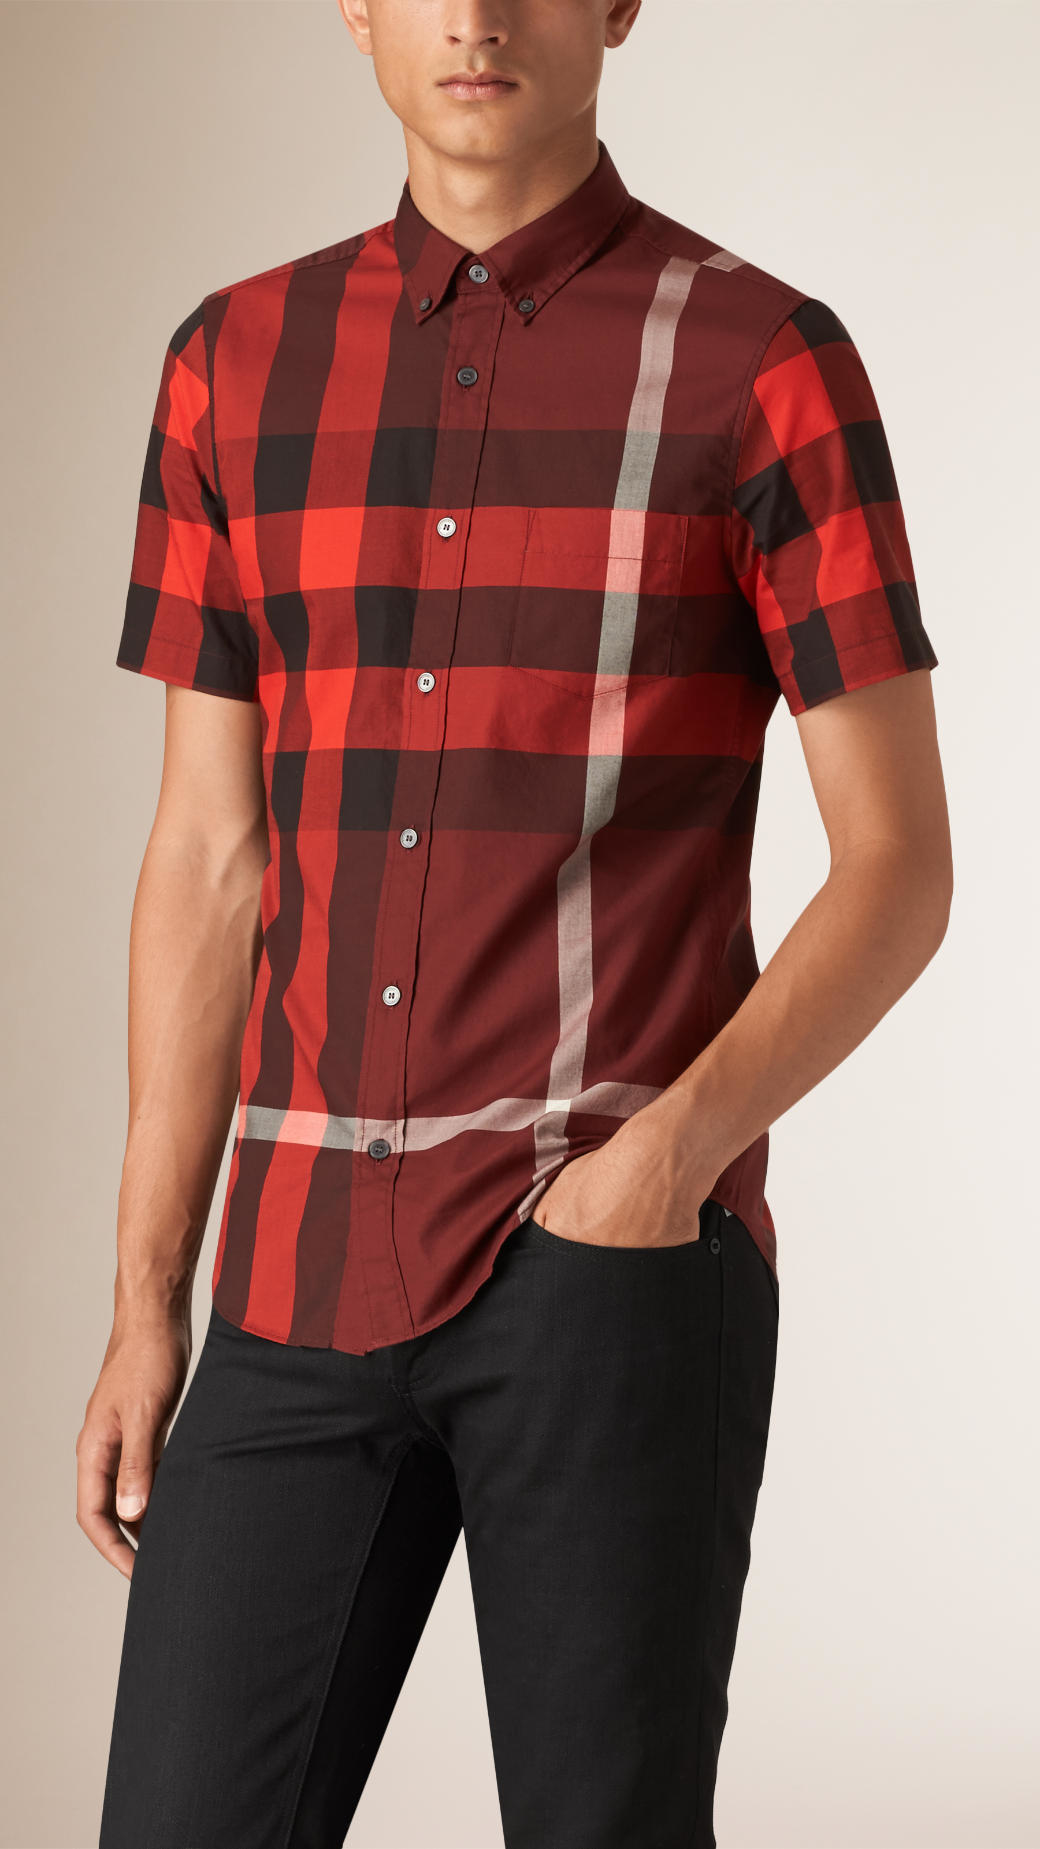 Lyst - Burberry Giant Exploded Check Cotton Shirt Oxblood in Red for Men